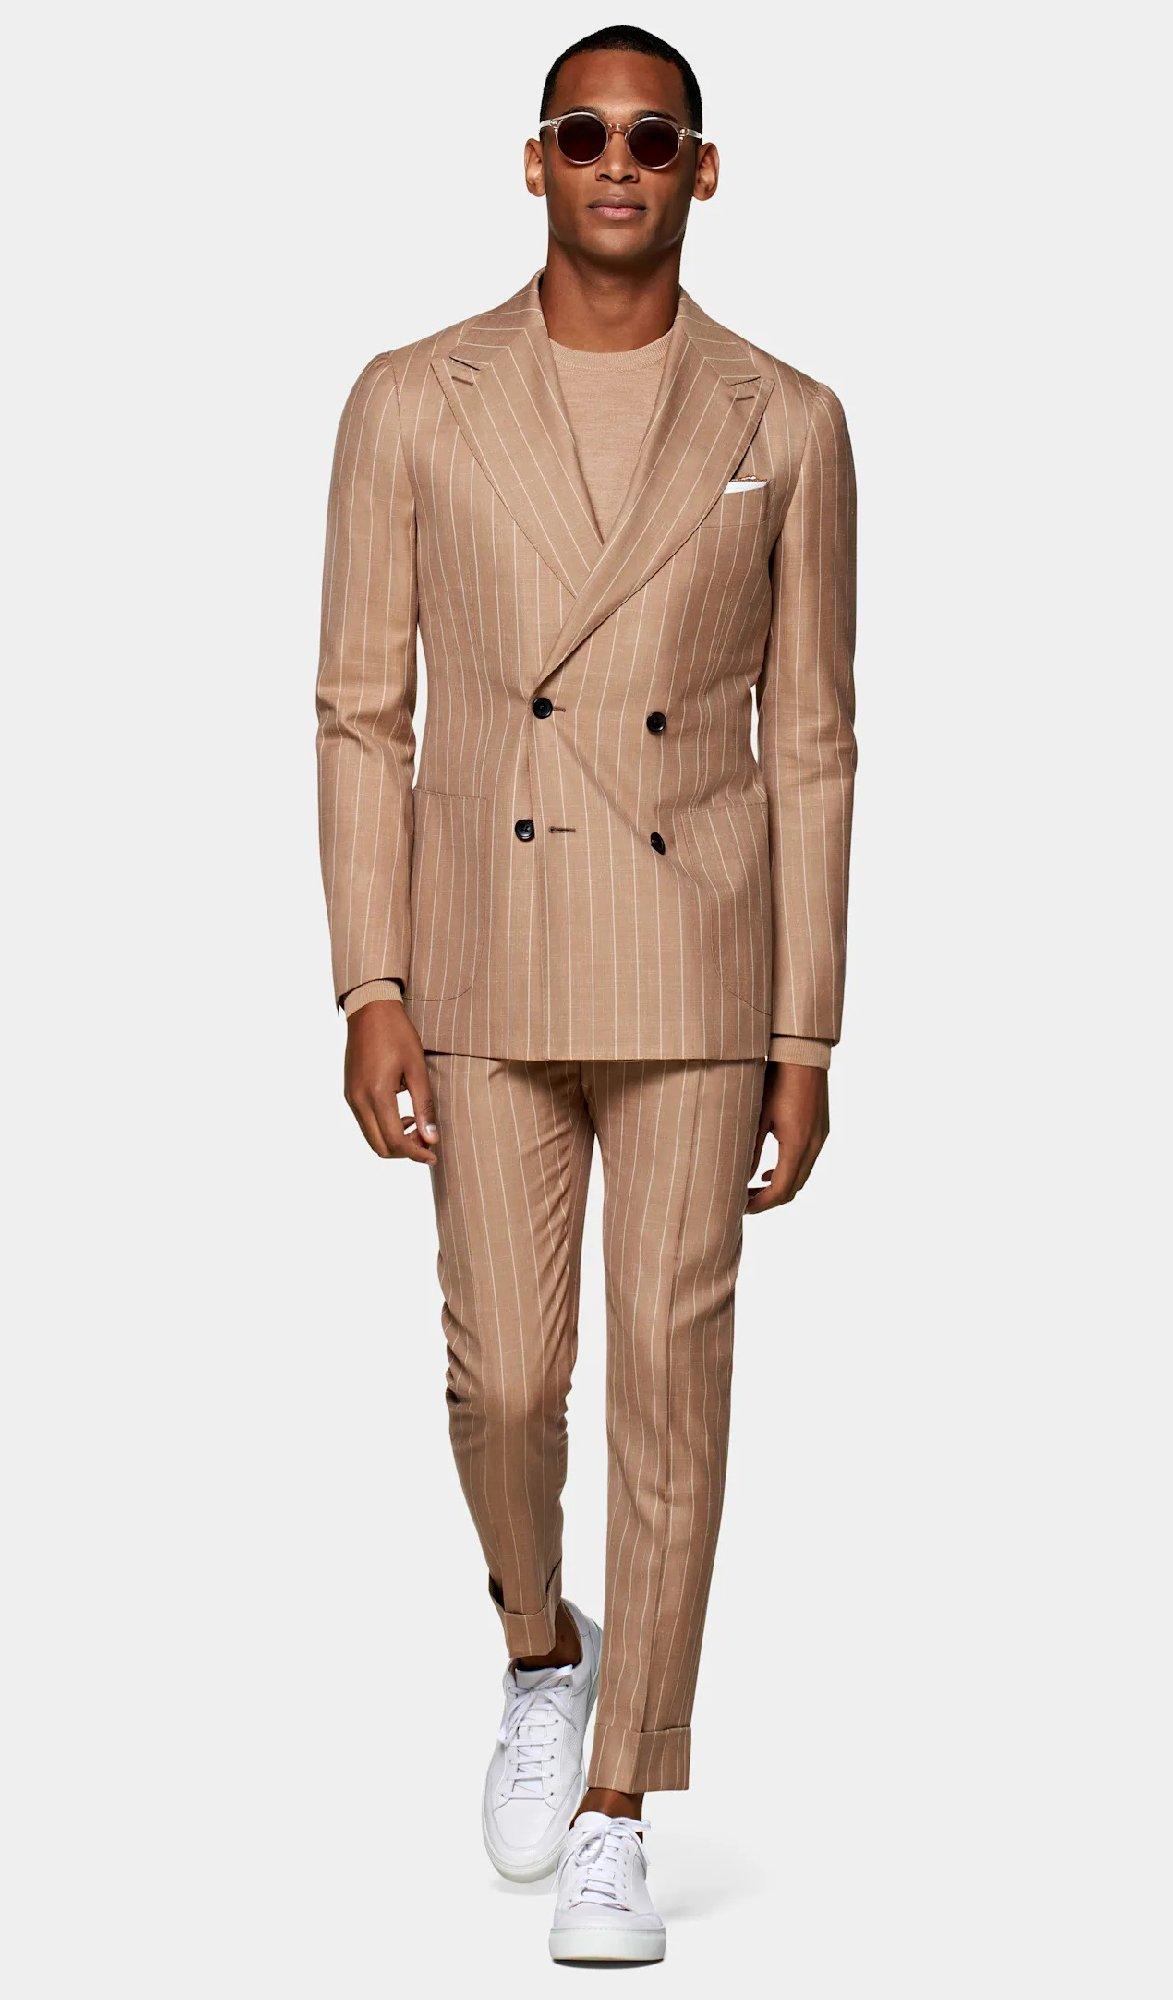 Top 10 Spring/Summer Wedding Outfit Ideas for Men - The HUB